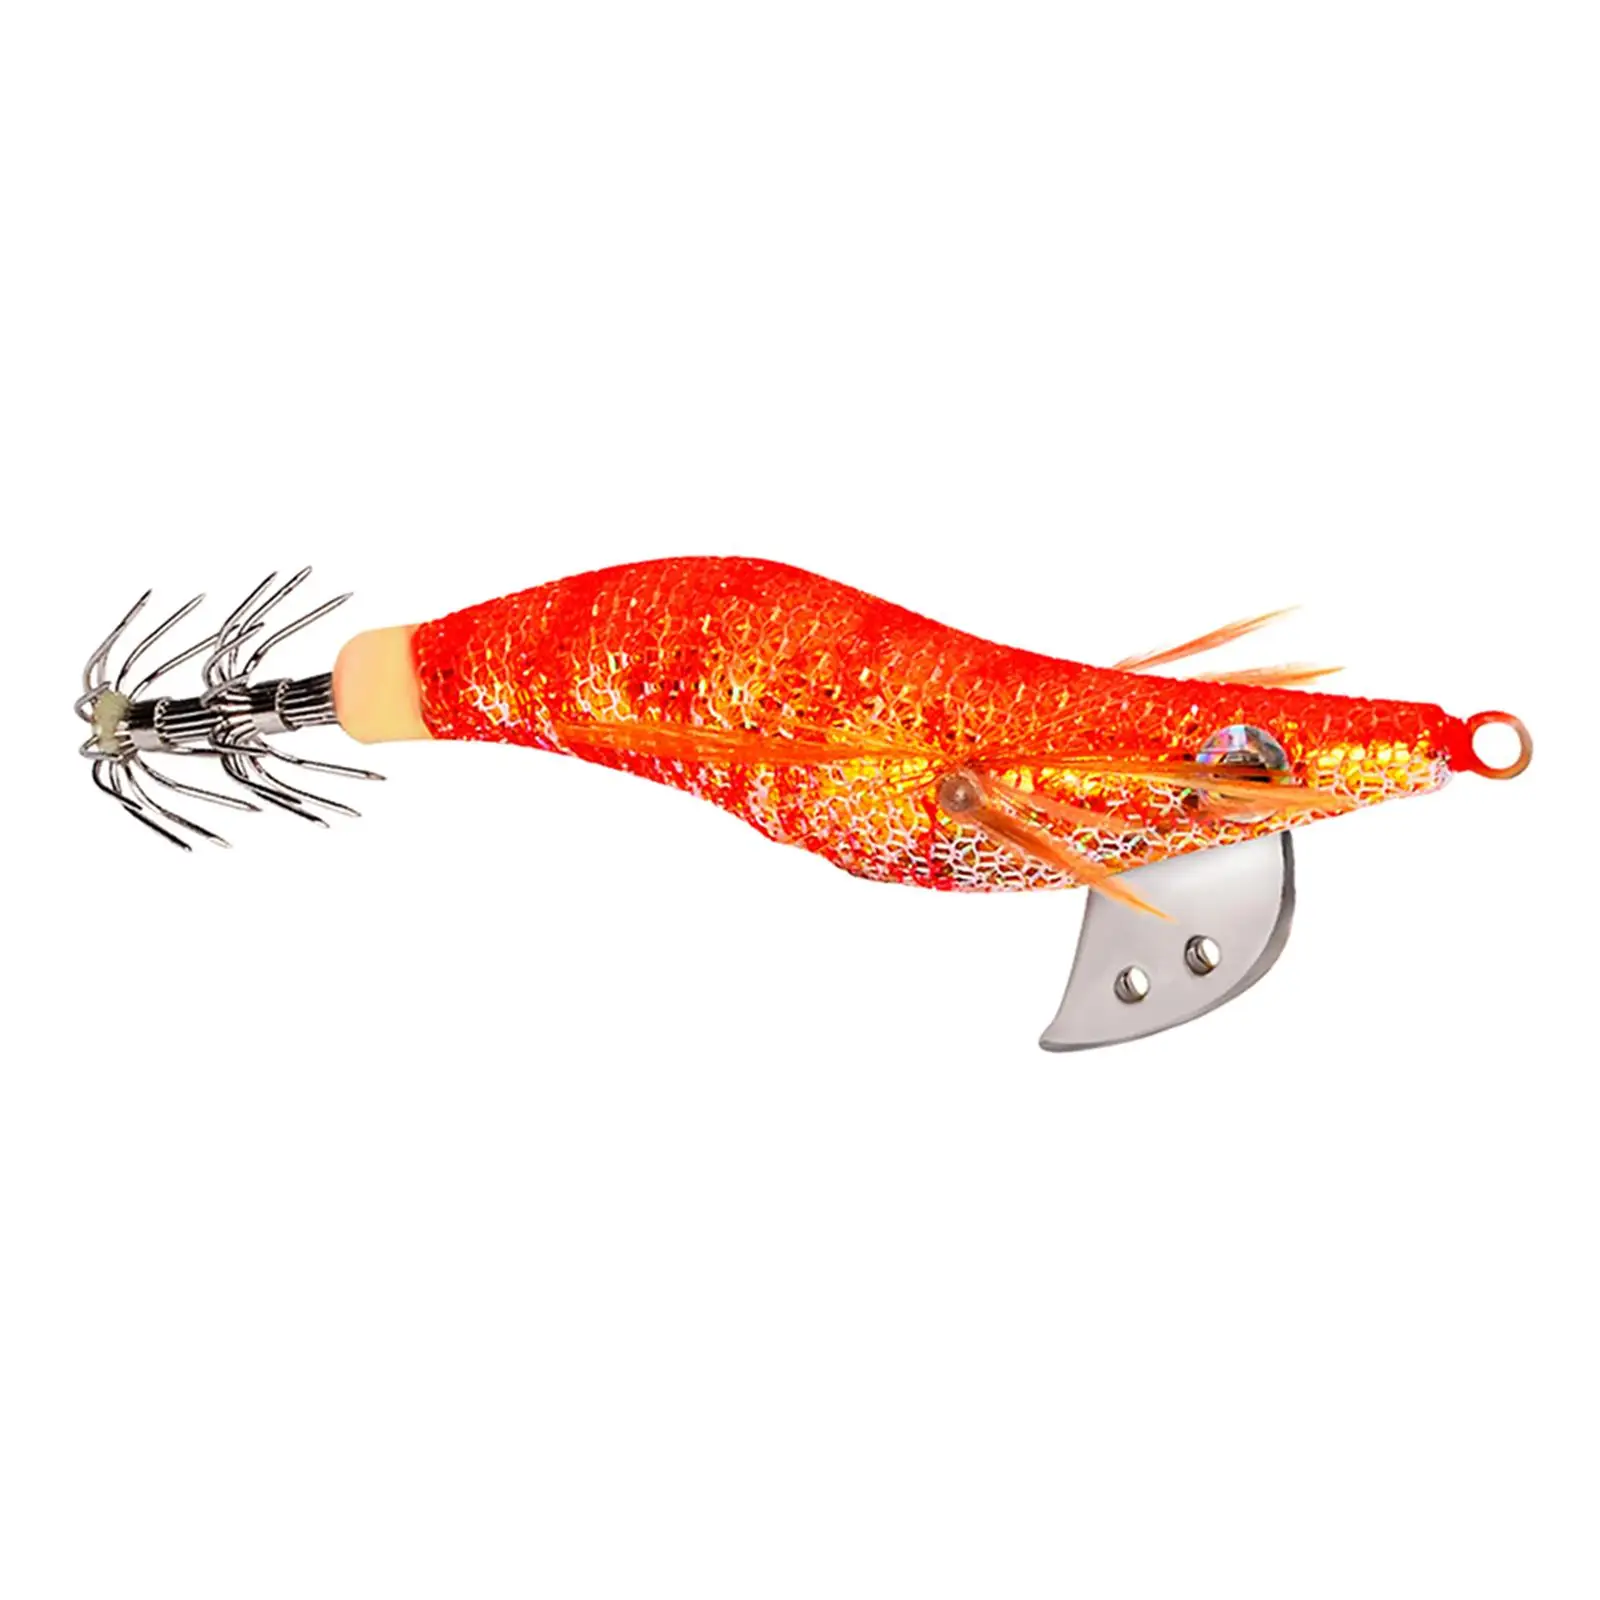 Trout Lures Bright Colors Attracting Effect 3.35inch Squid Jig Hooks for Anglers Gift Mandarin Fish All Waters Freshwater